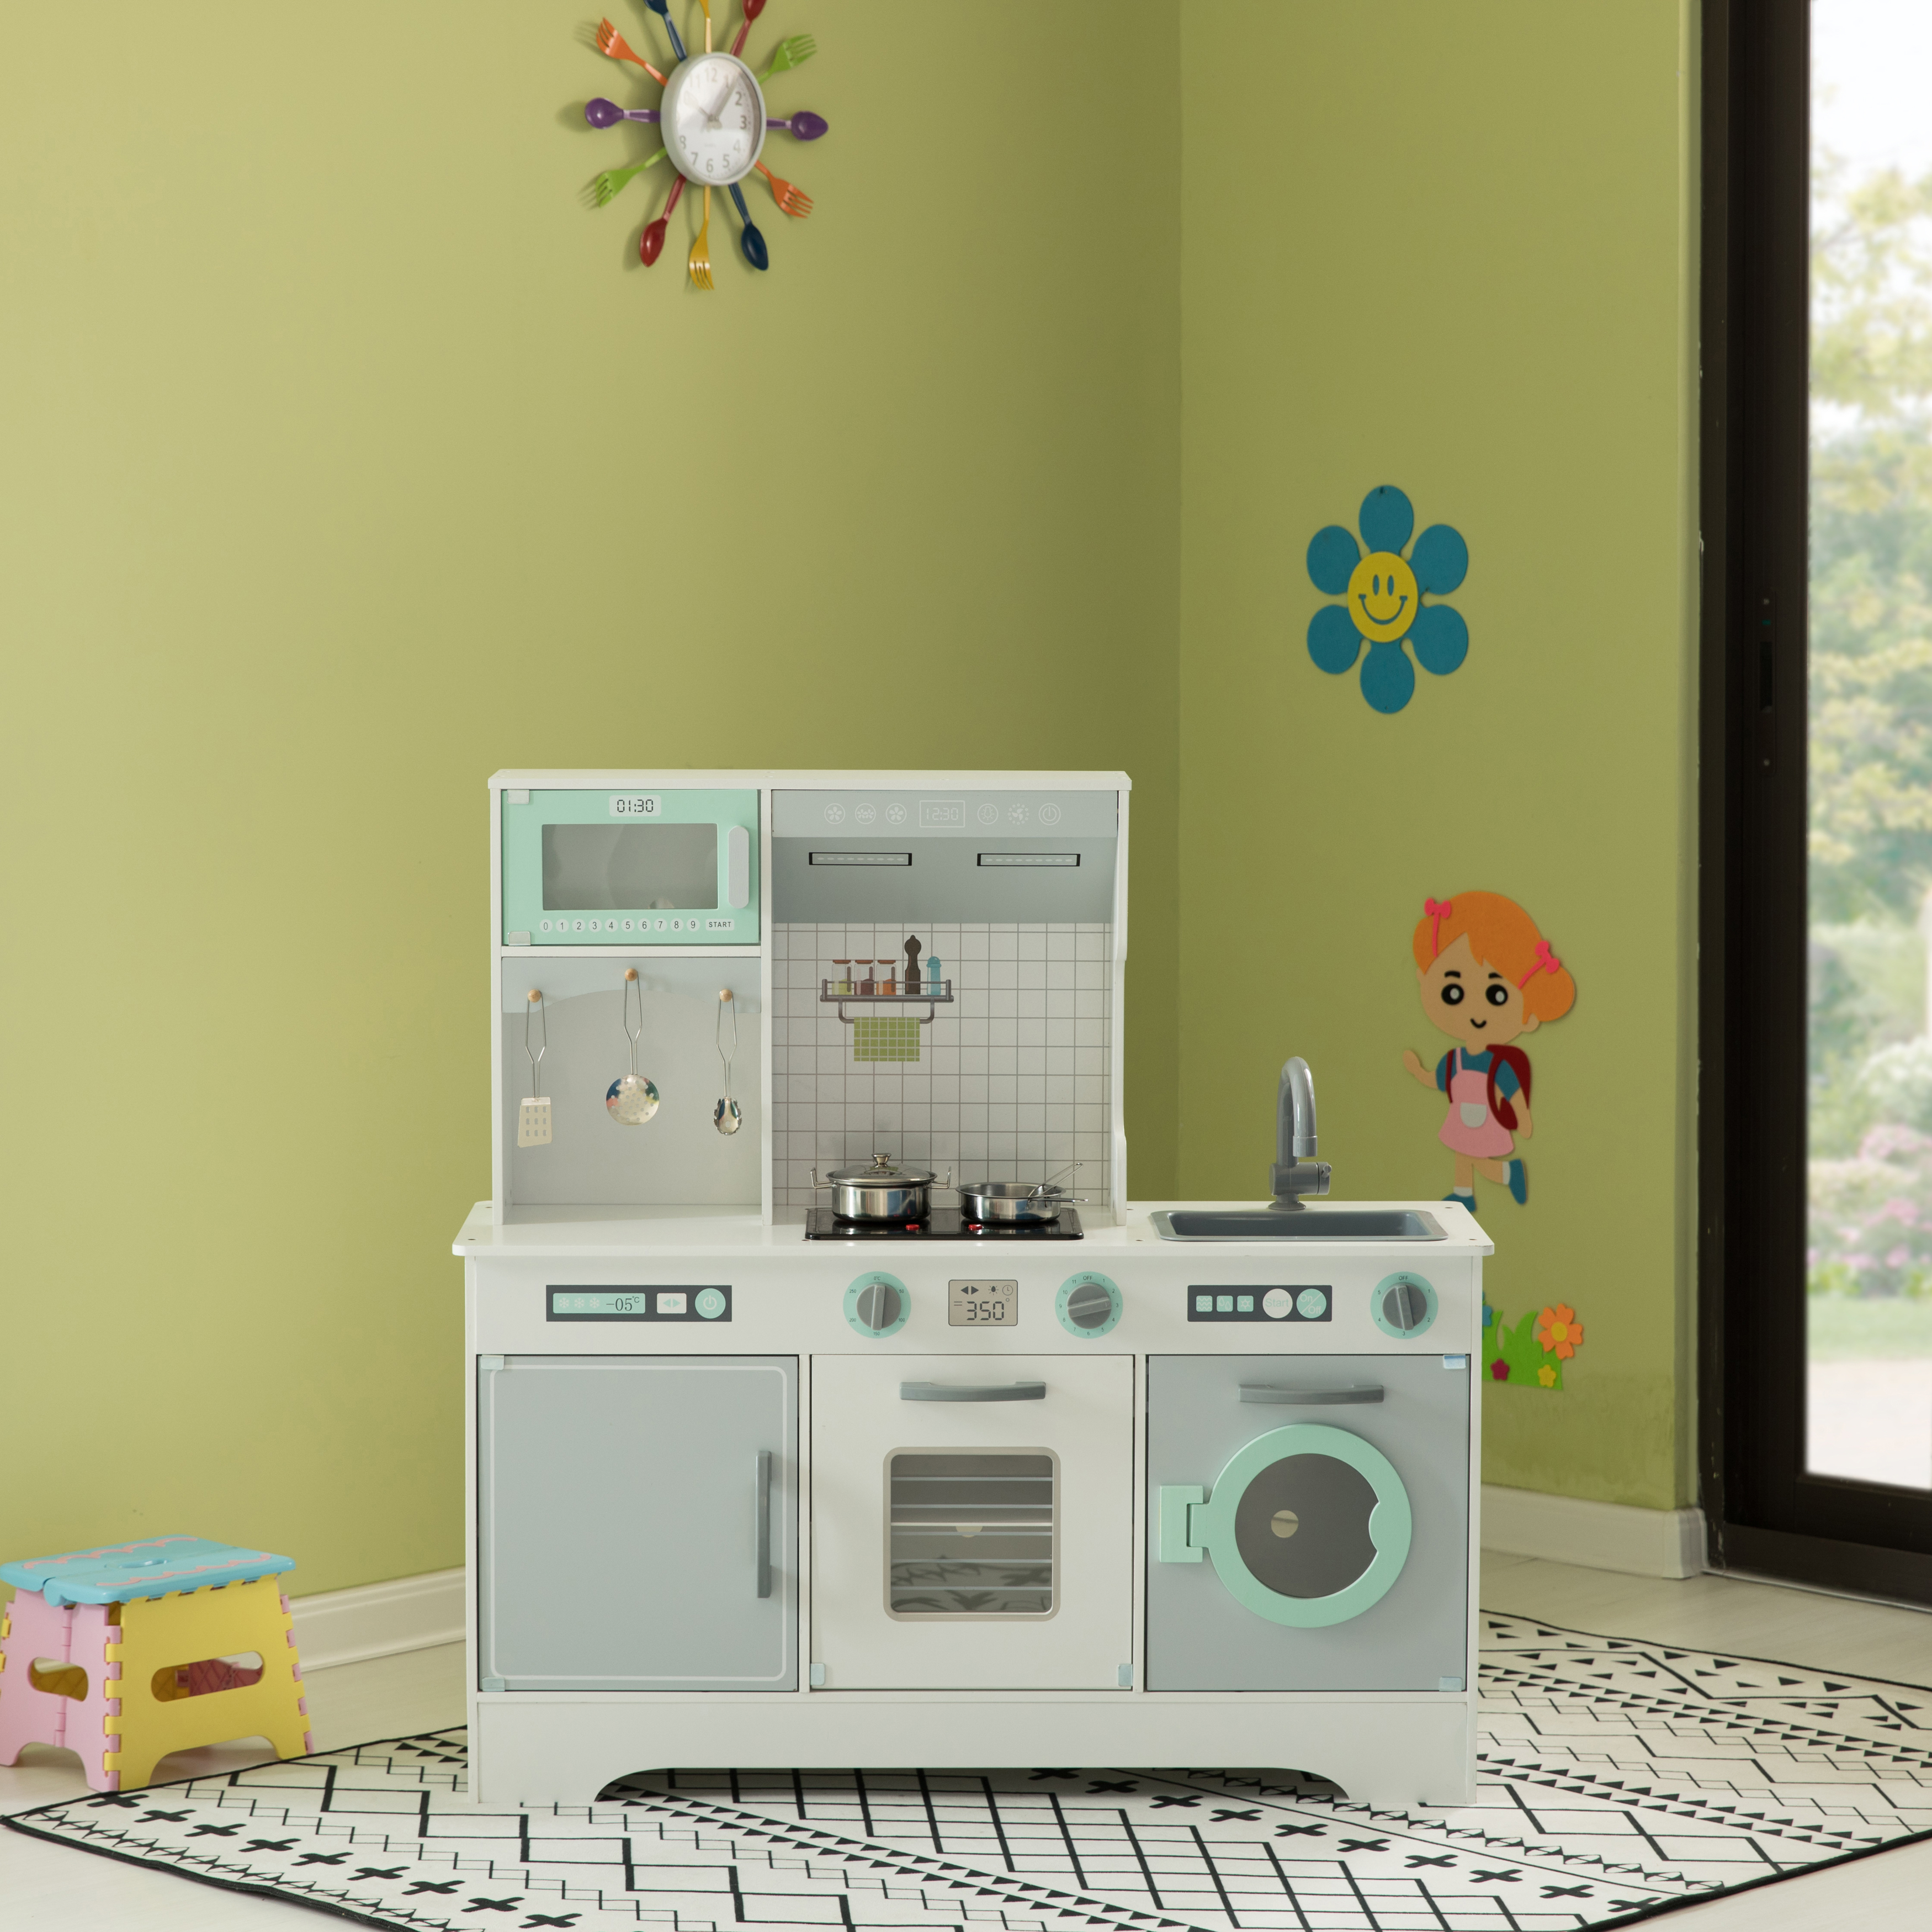 Wooden Play Kitchen Toy, Light on Microwave, Cabinet, Washer, Sound Electronic Stove, Microwave and Sink Ages 3+